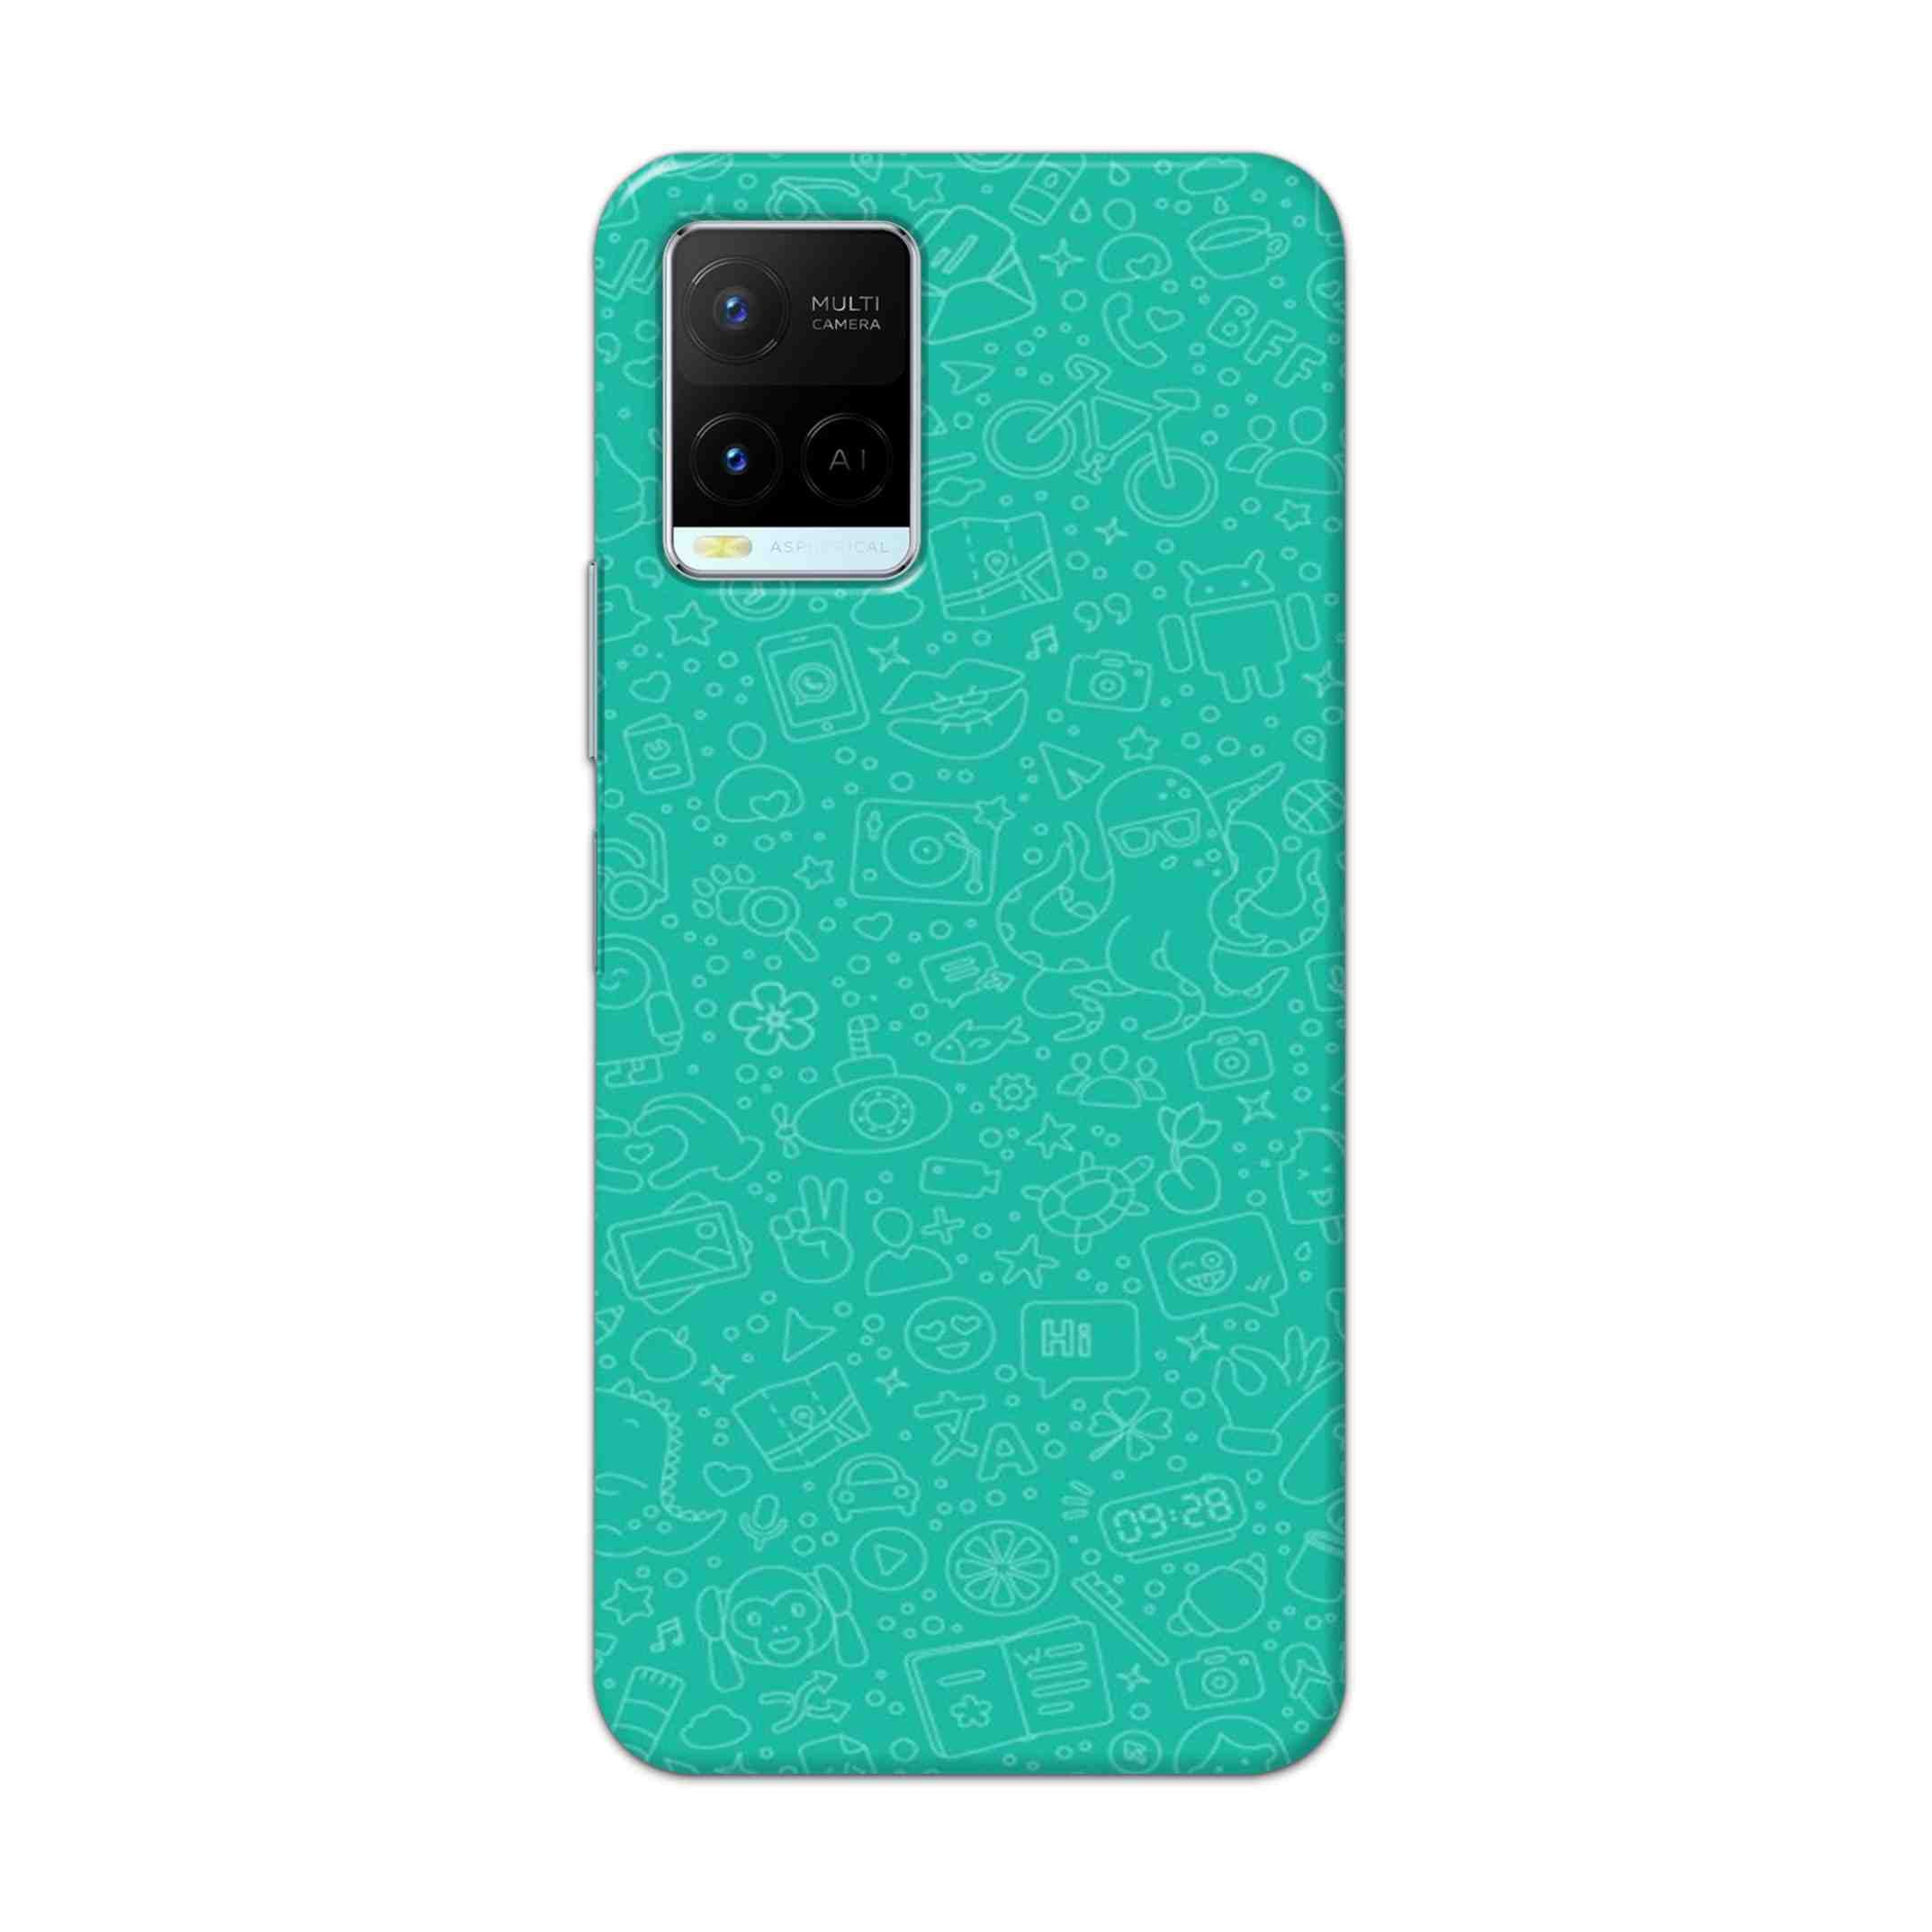 Buy Whatsapp Hard Back Mobile Phone Case Cover For Vivo Y21 2021 Online